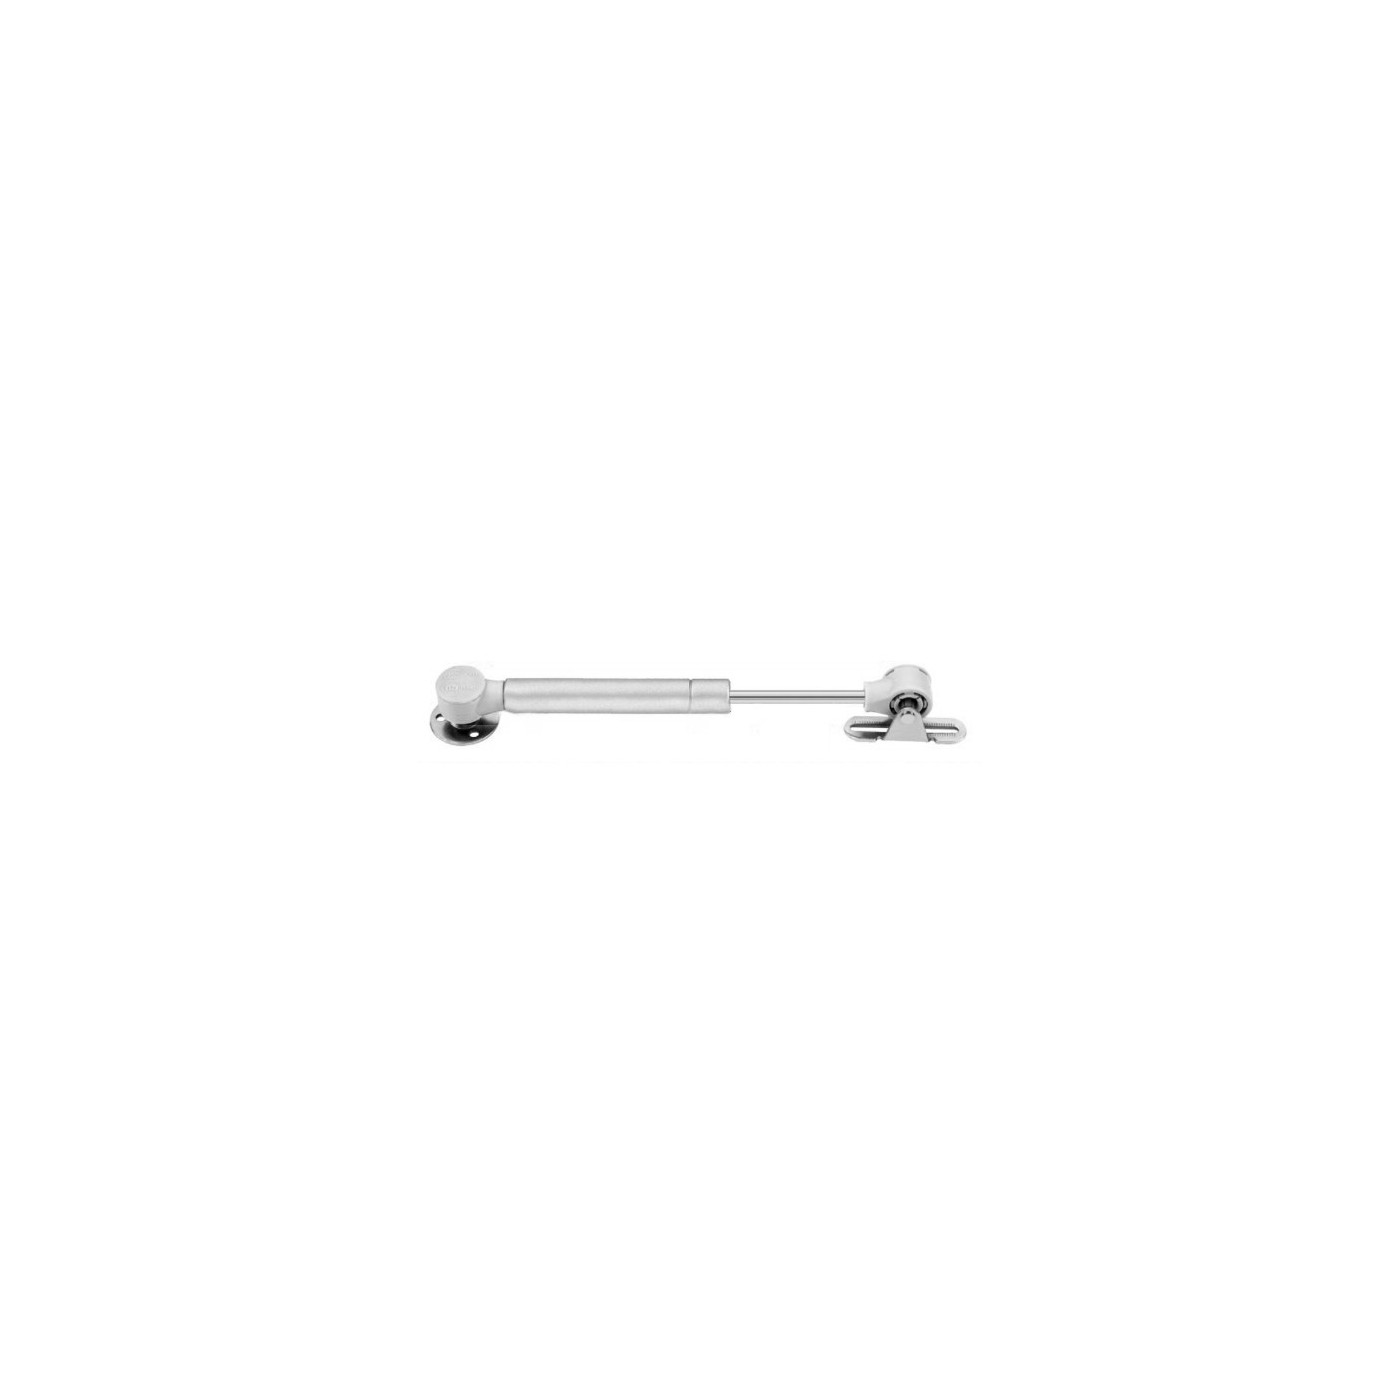 Universal gas spring with brackets (100N/10kg, 172 mm, silver)